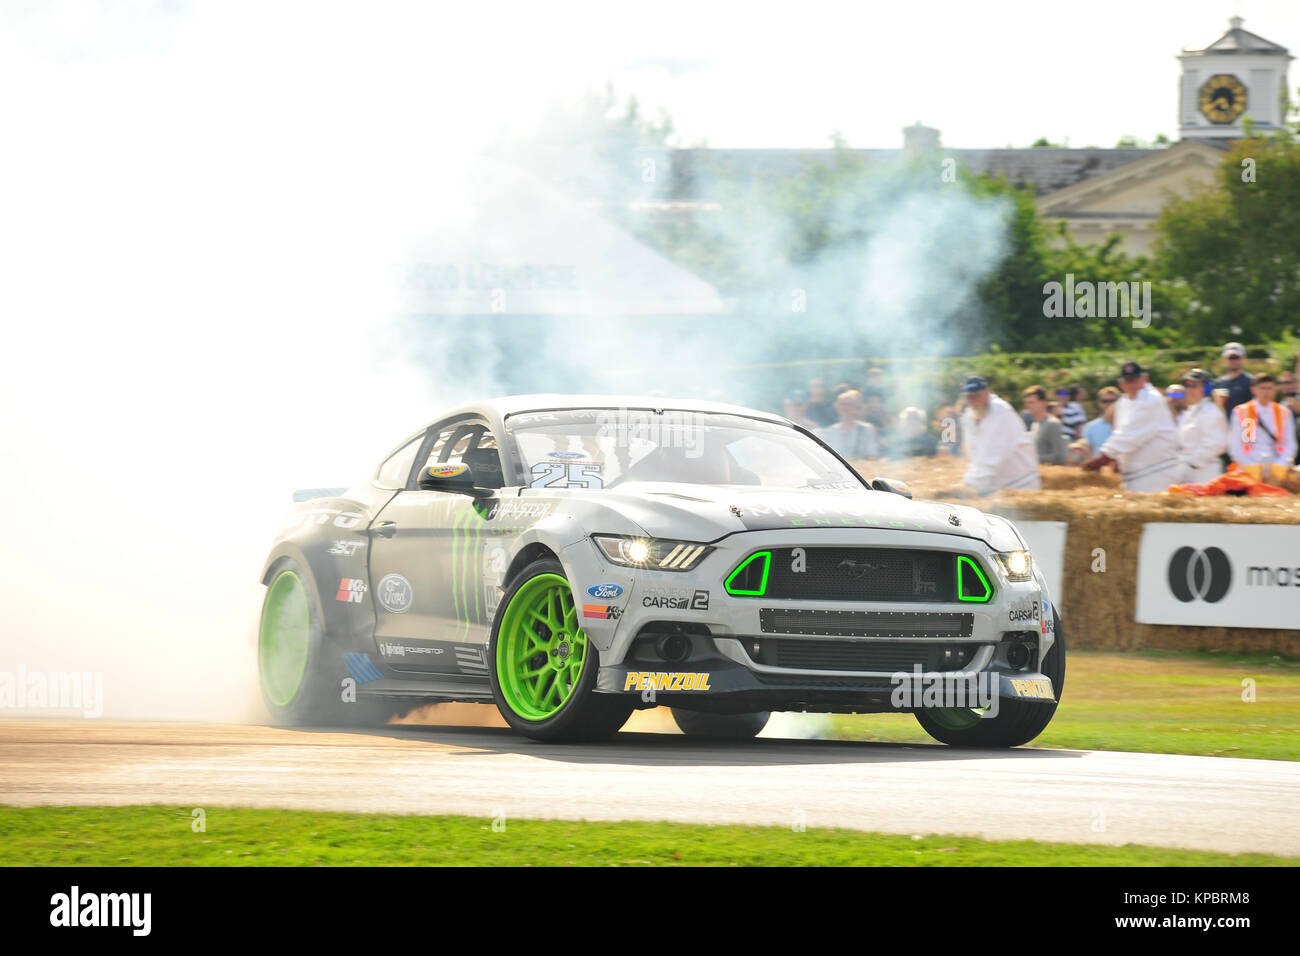 A car performing a burn out at the 2017 Goodwood Festival of Speed. Stock Photo